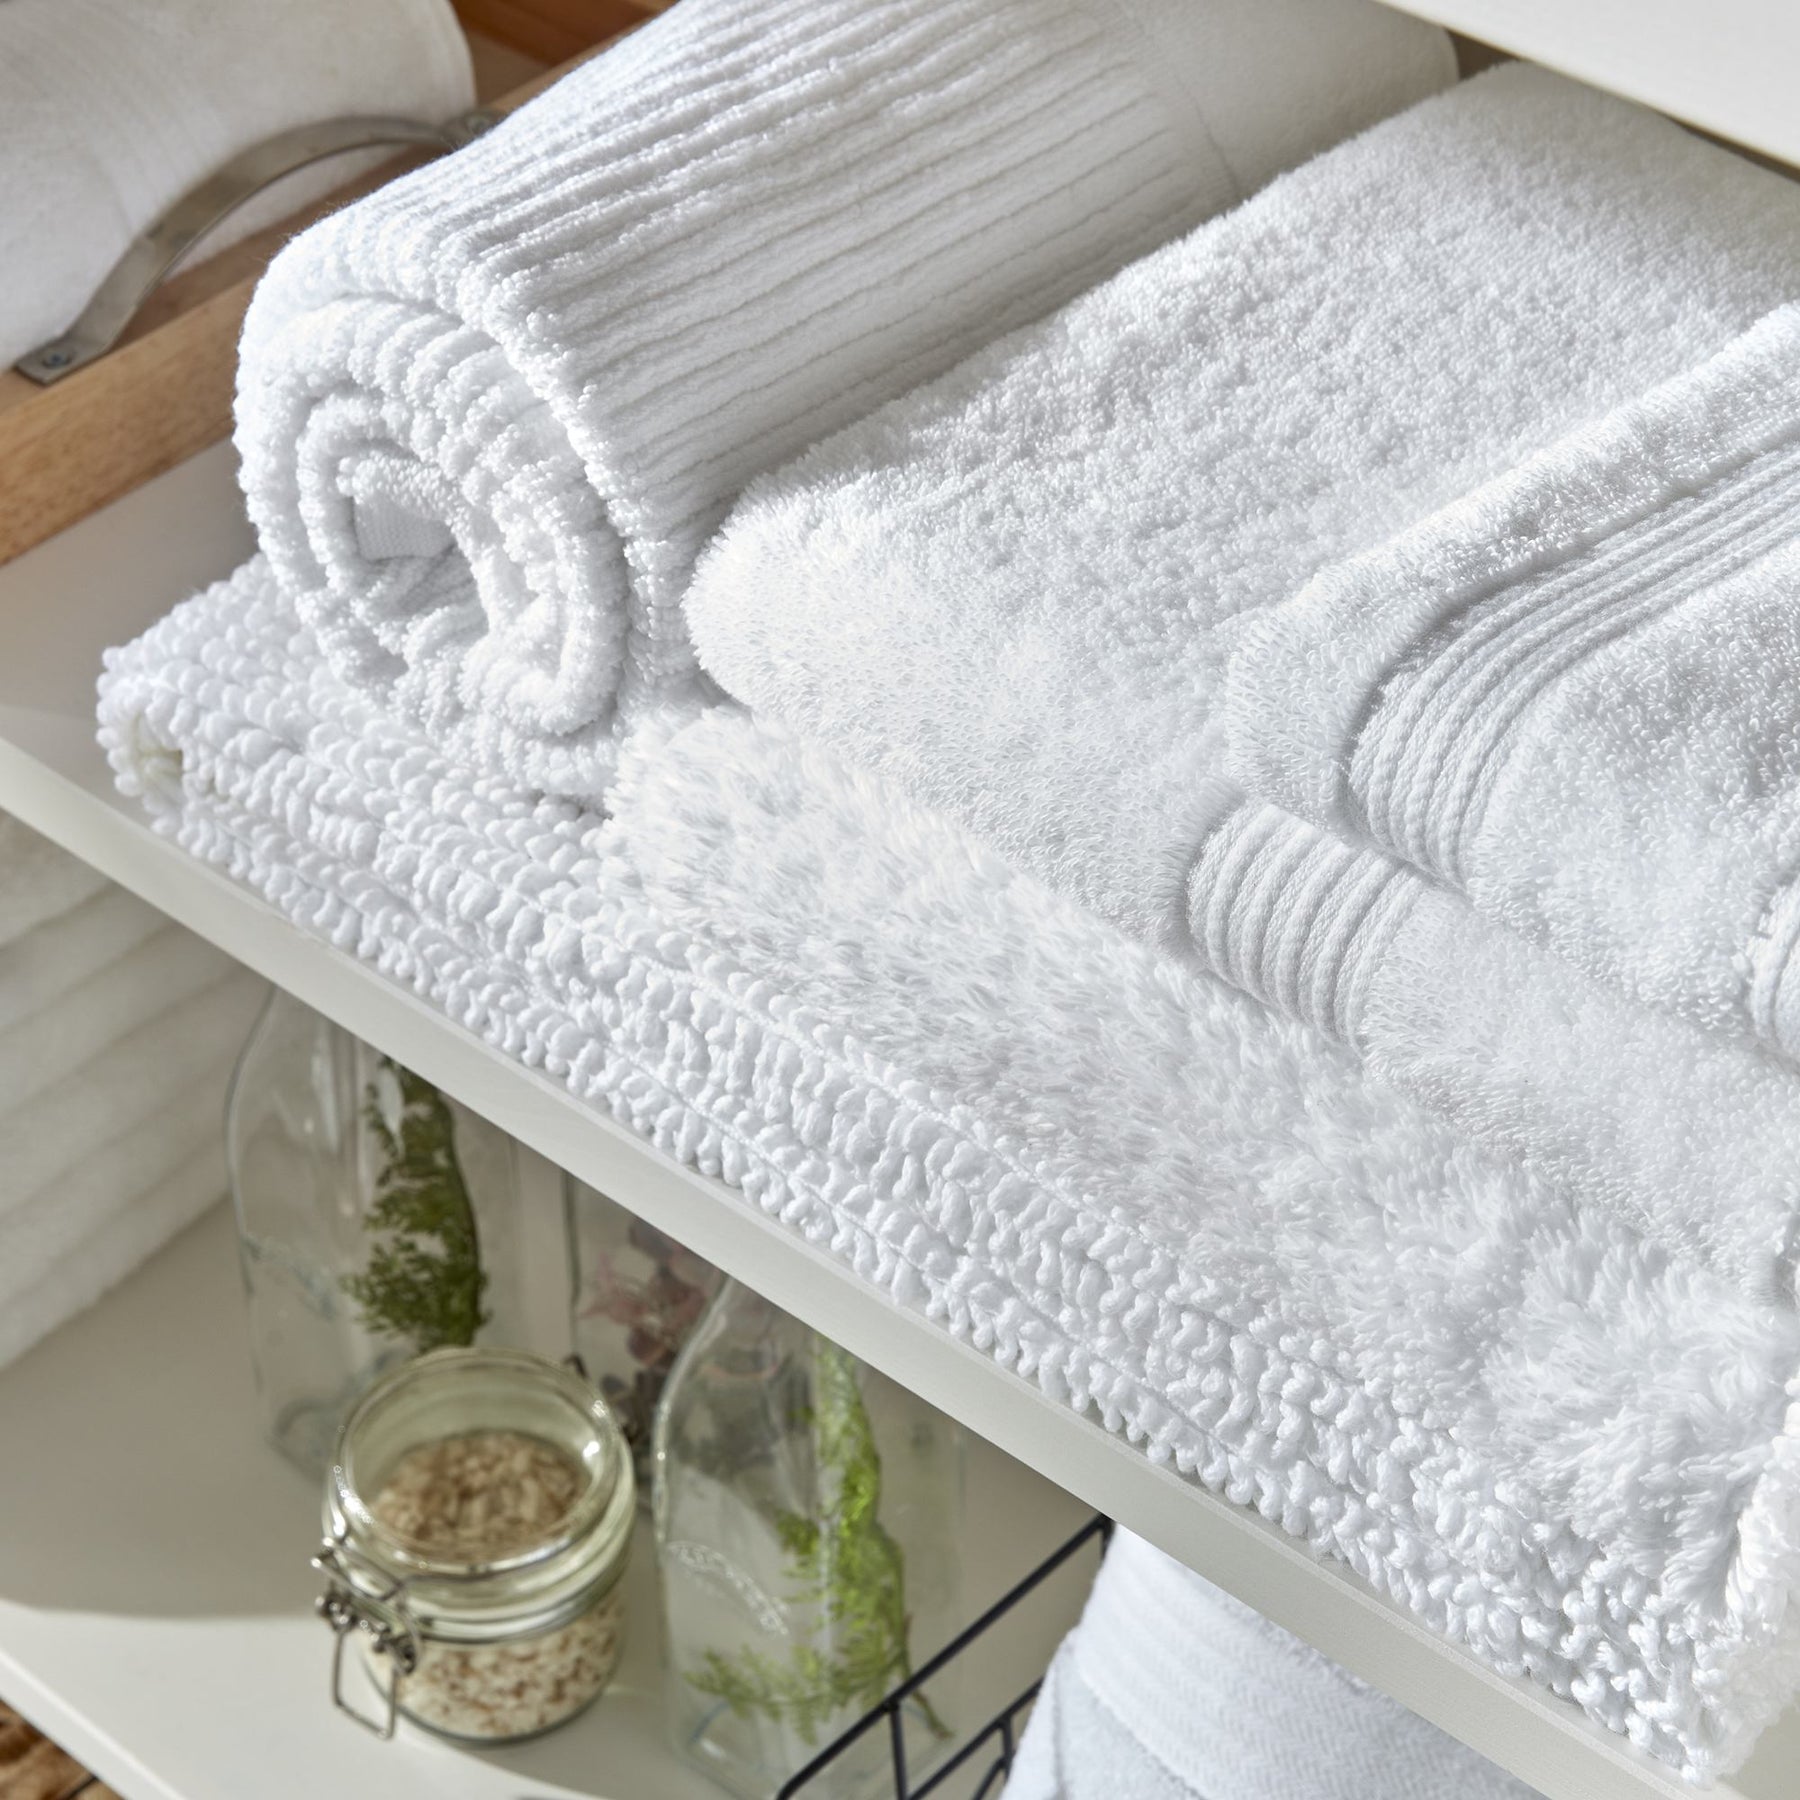 Christy Supreme White Towels